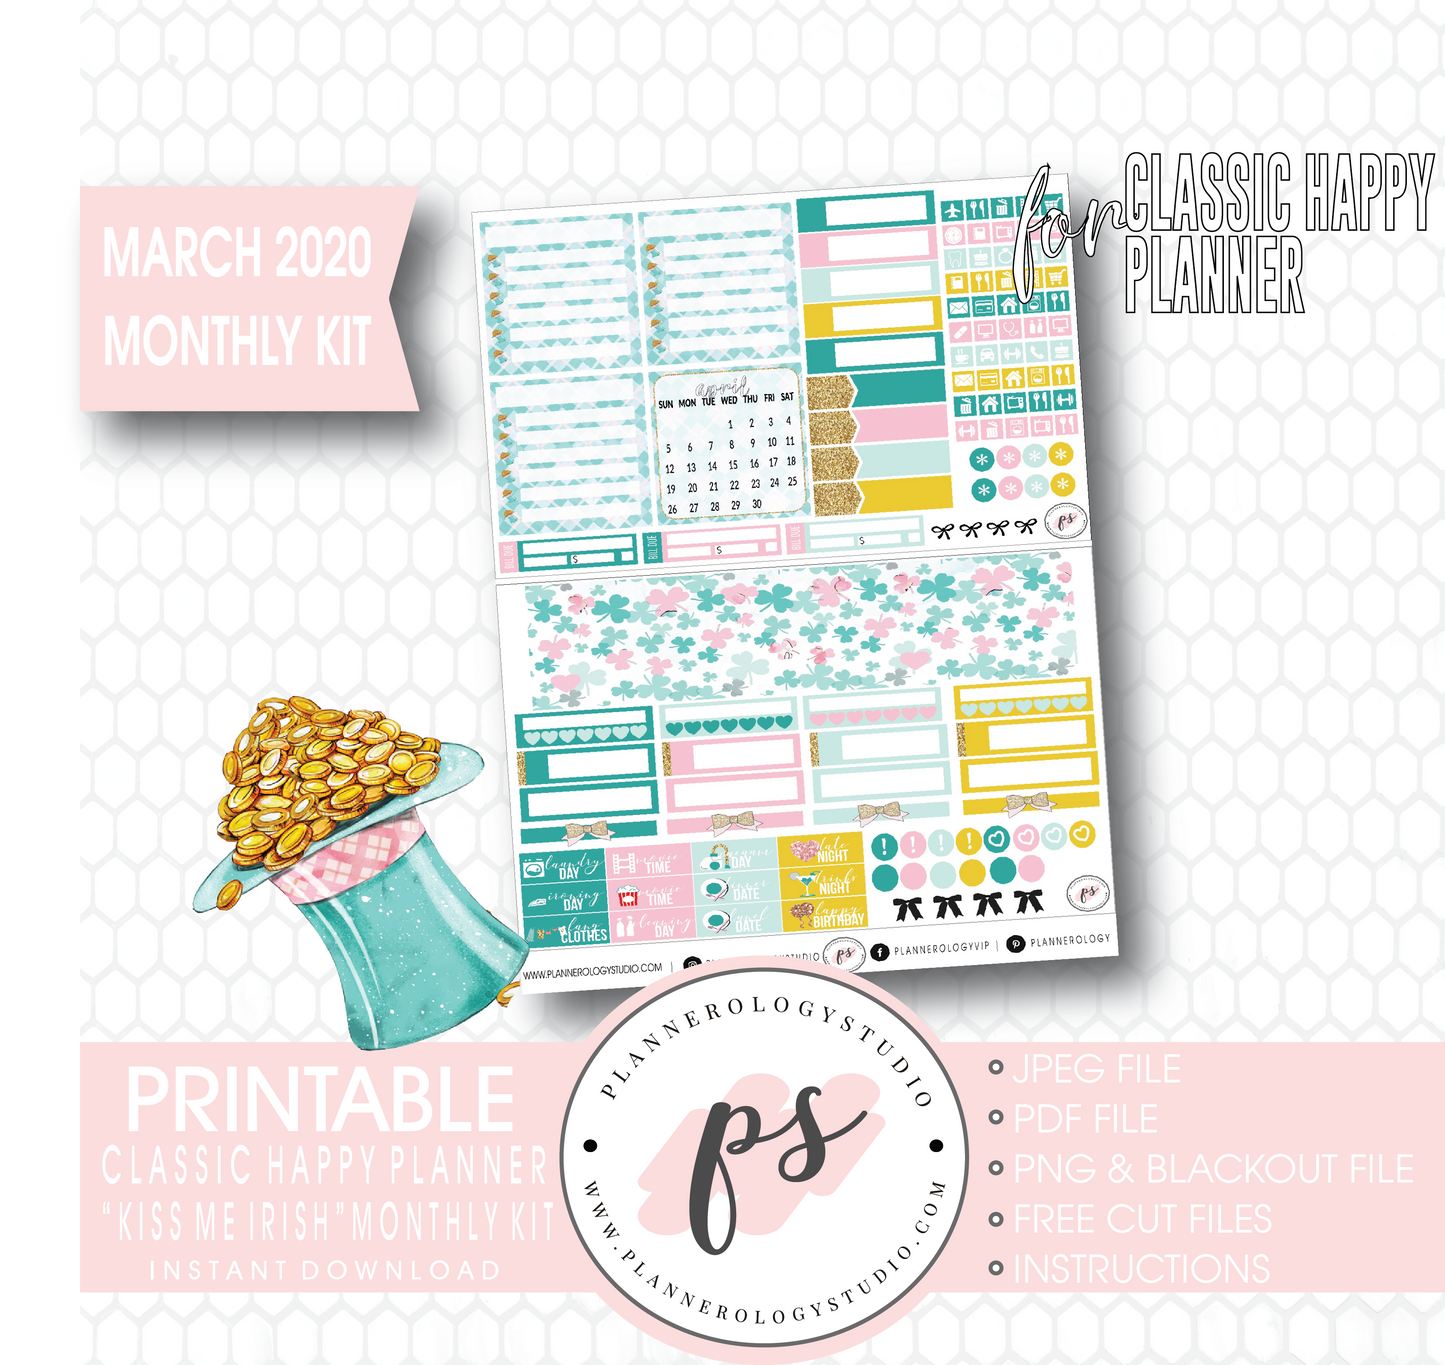 Kiss Me Irish March 2020 Monthly View Kit Digital Printable Planner Stickers (for use with Classic Happy Planner) - Plannerologystudio